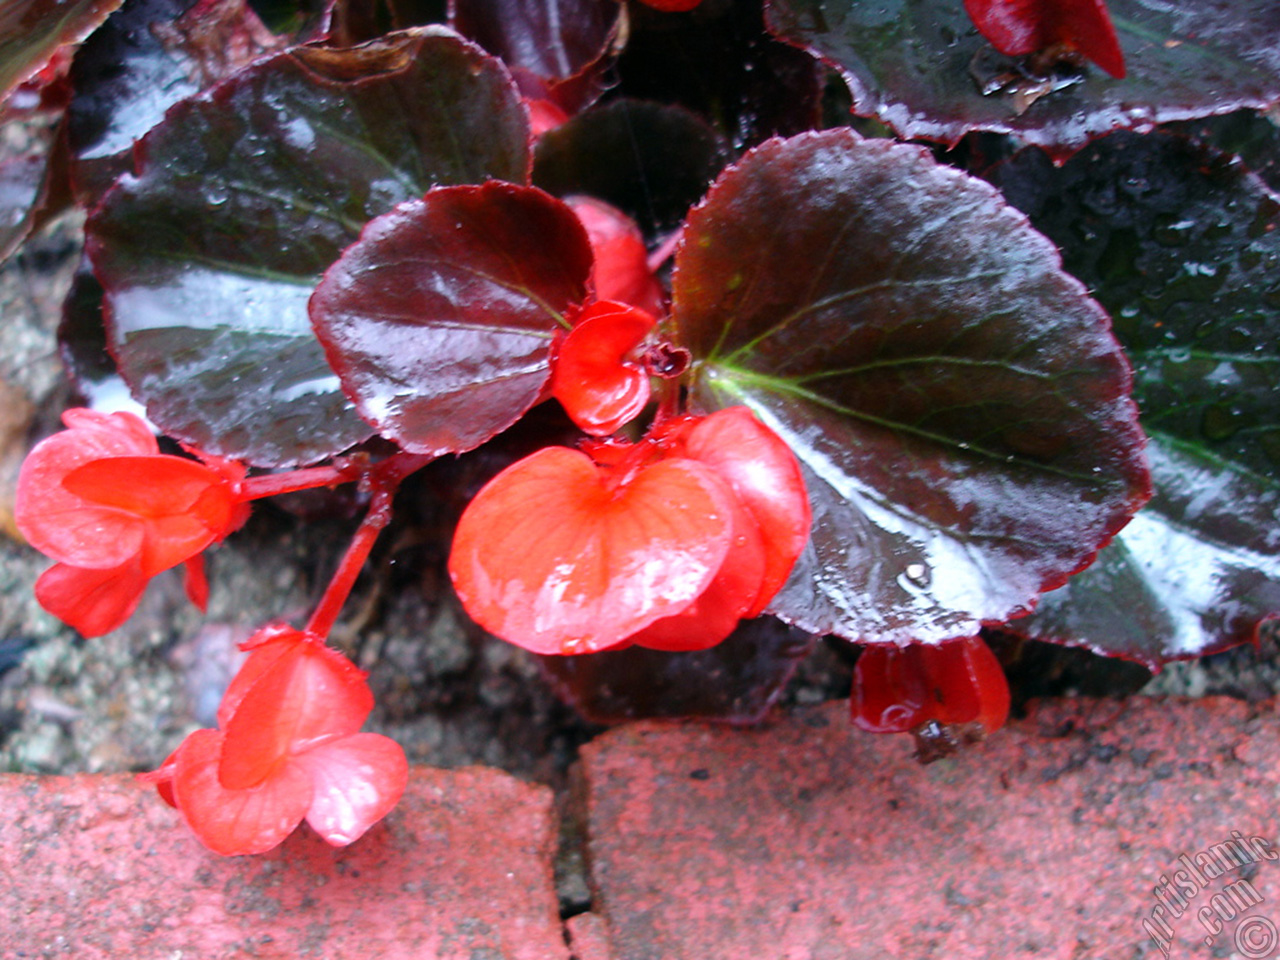 Wax Begonia -Bedding Begonia- with red flowers and brown leaves.
